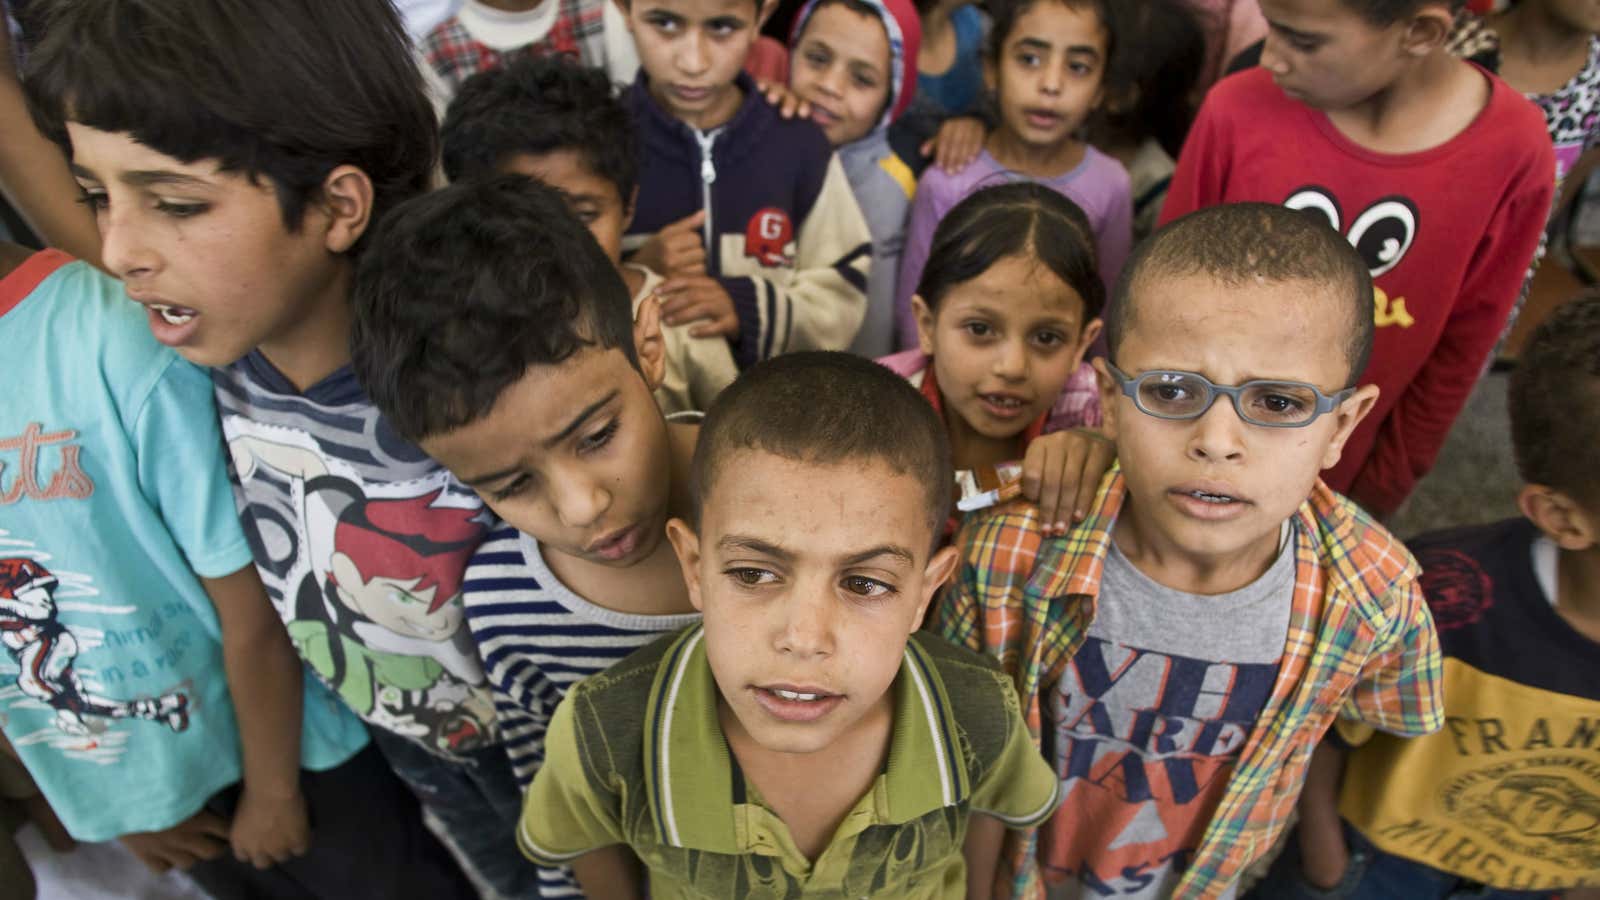 To escape airstrikes, these Yemeni kids had to leave their homes behind.